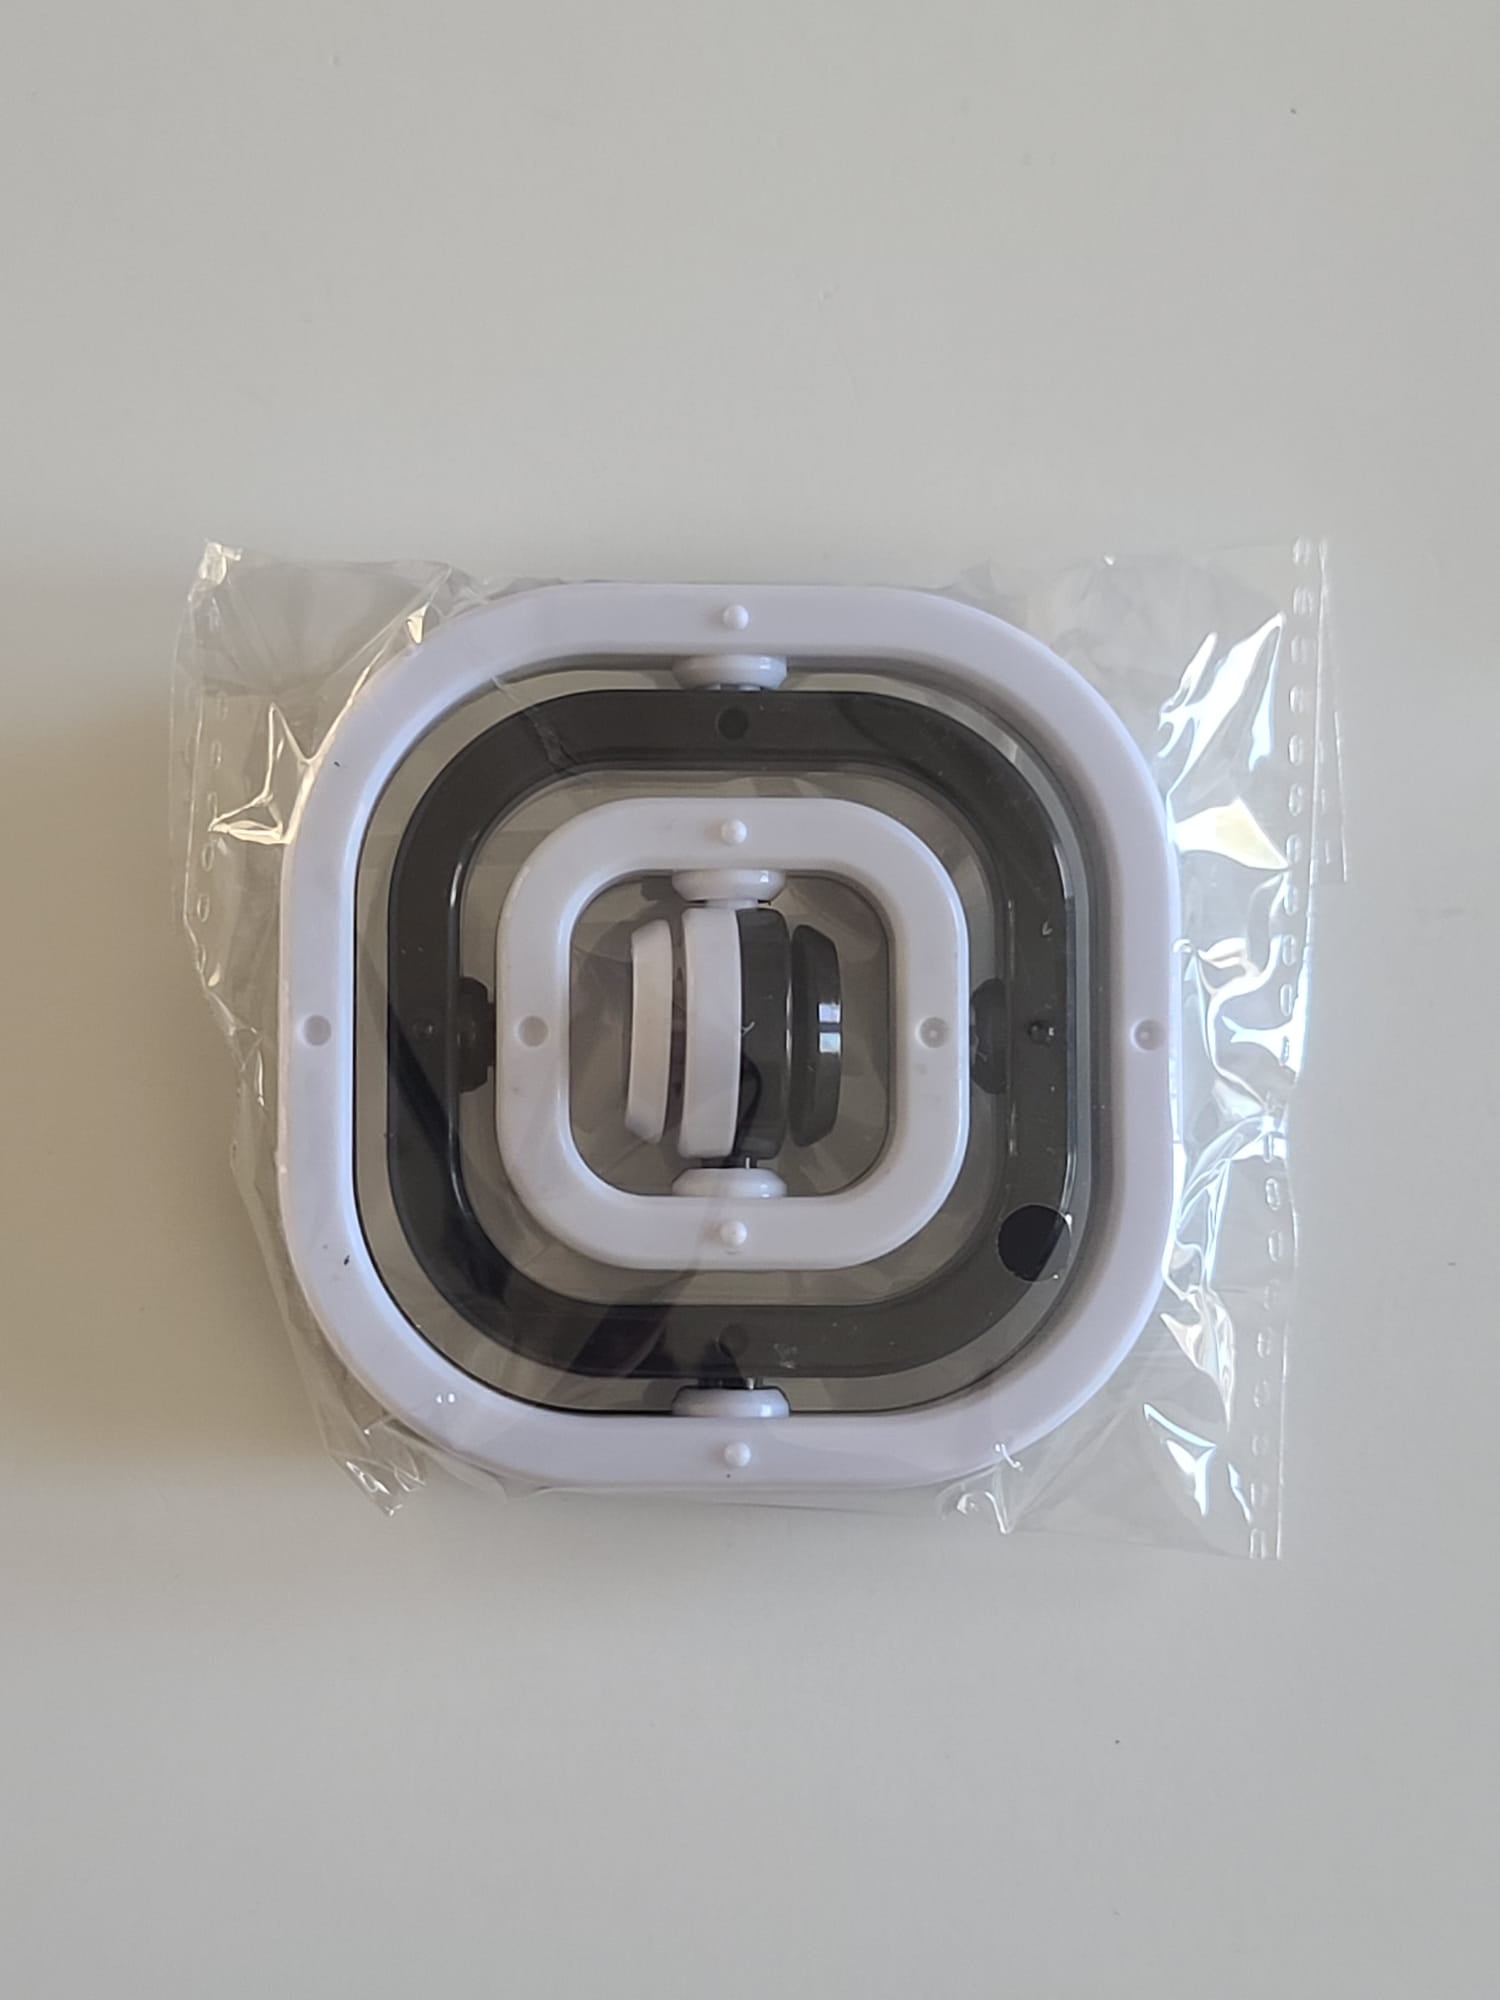 Packing Image Of Triple Flipping Square Spinner